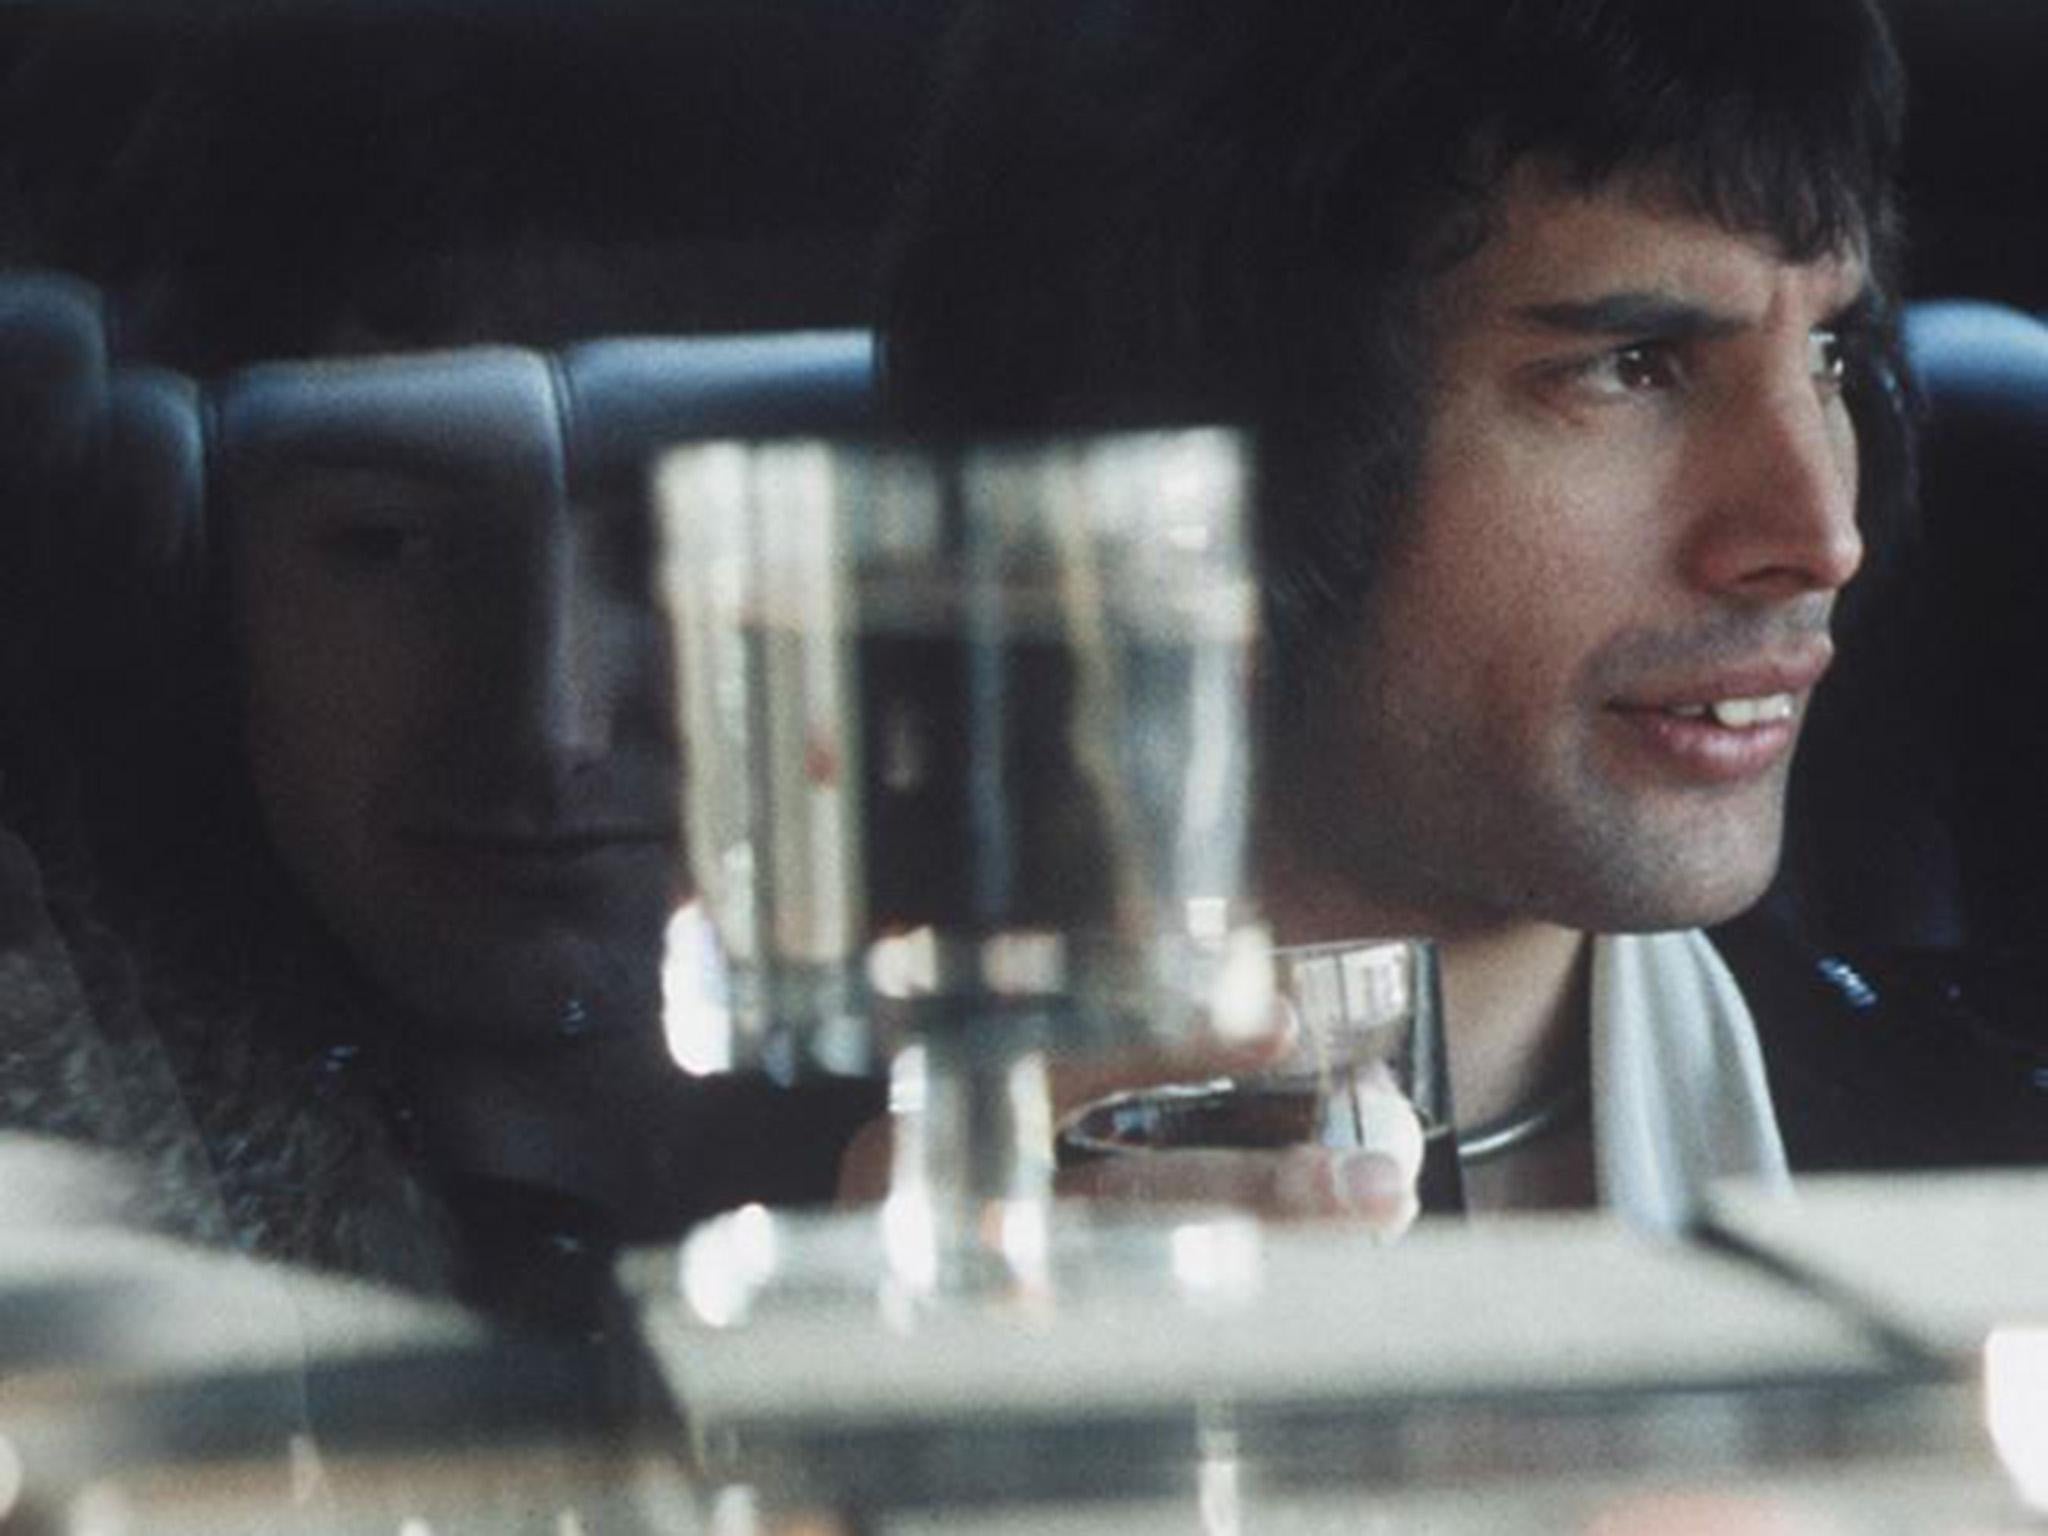 Behind the glass: Freddie looking reflective in a New York Cadillac